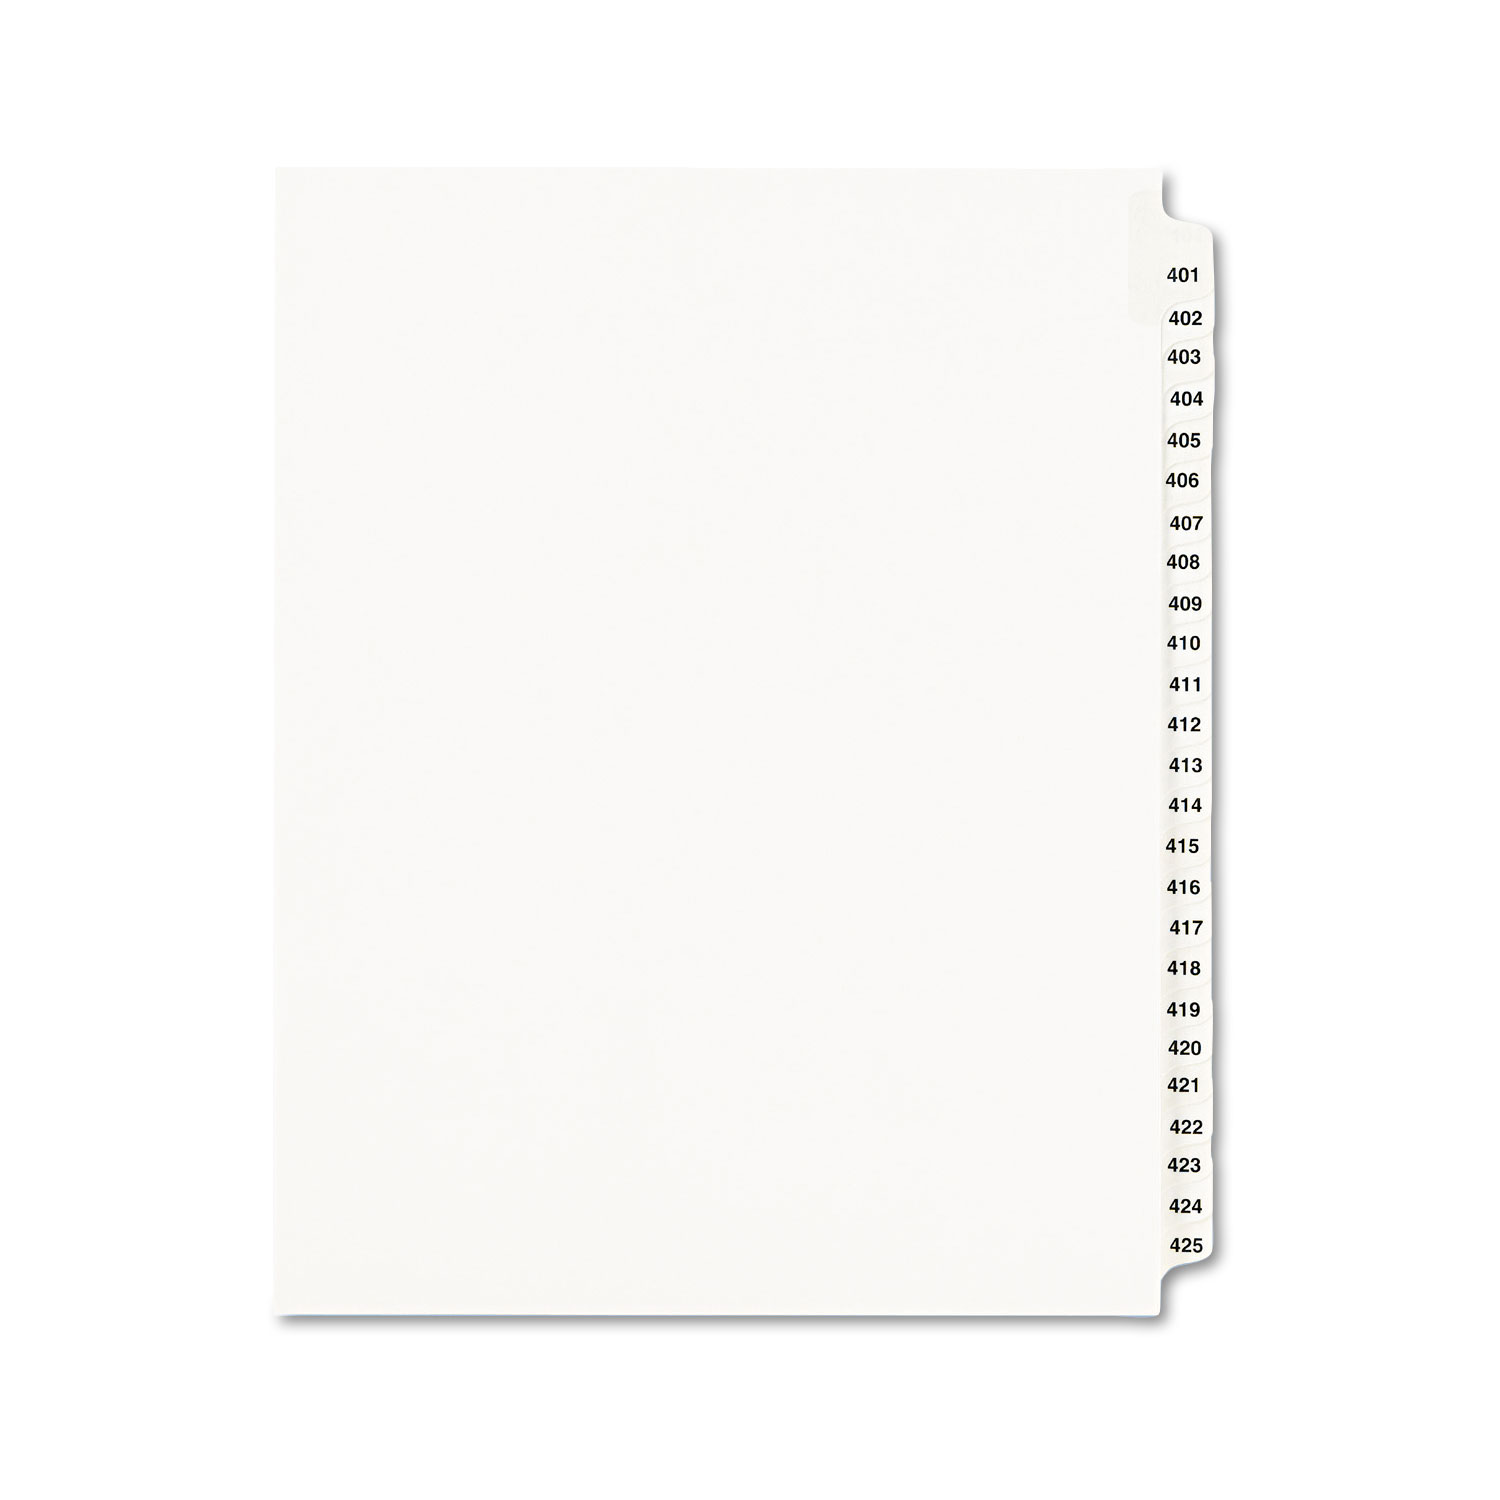  Avery 01346 Preprinted Legal Exhibit Side Tab Index Dividers, Avery Style, 25-Tab, 401 to 425, 11 x 8.5, White, 1 Set (AVE01346) 